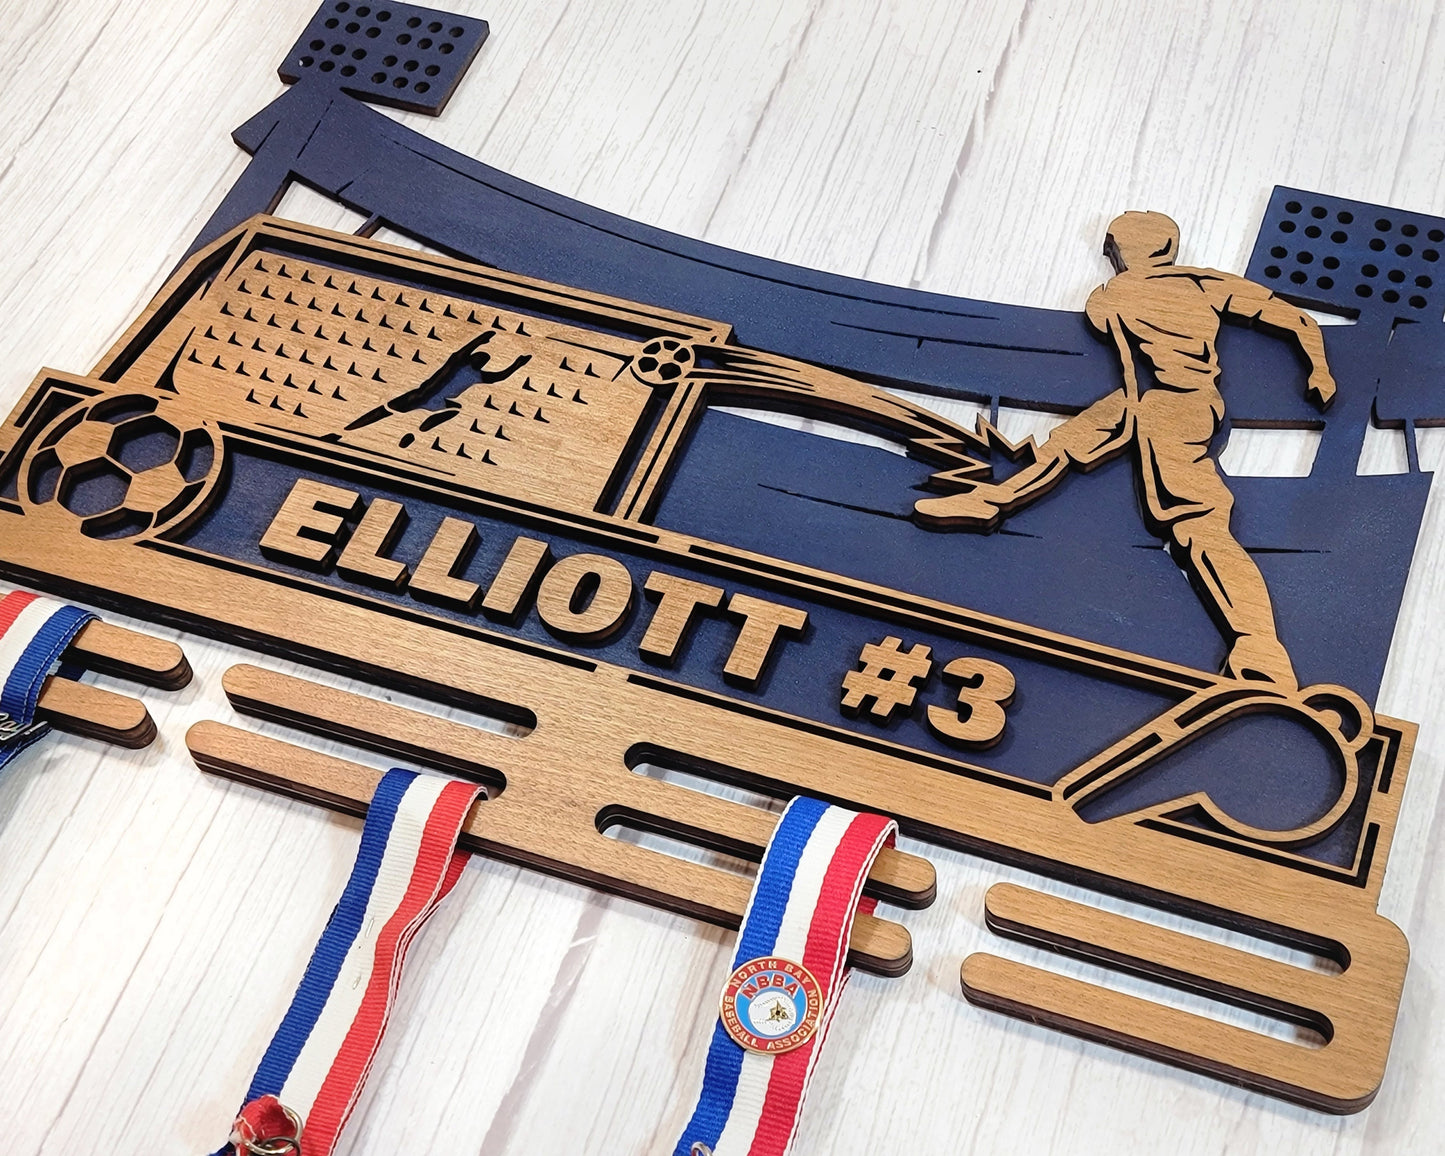 Stadium Series Medal Holders - Soccer - Male and Female Versions Included - SVG Files - Sized for Glowforge